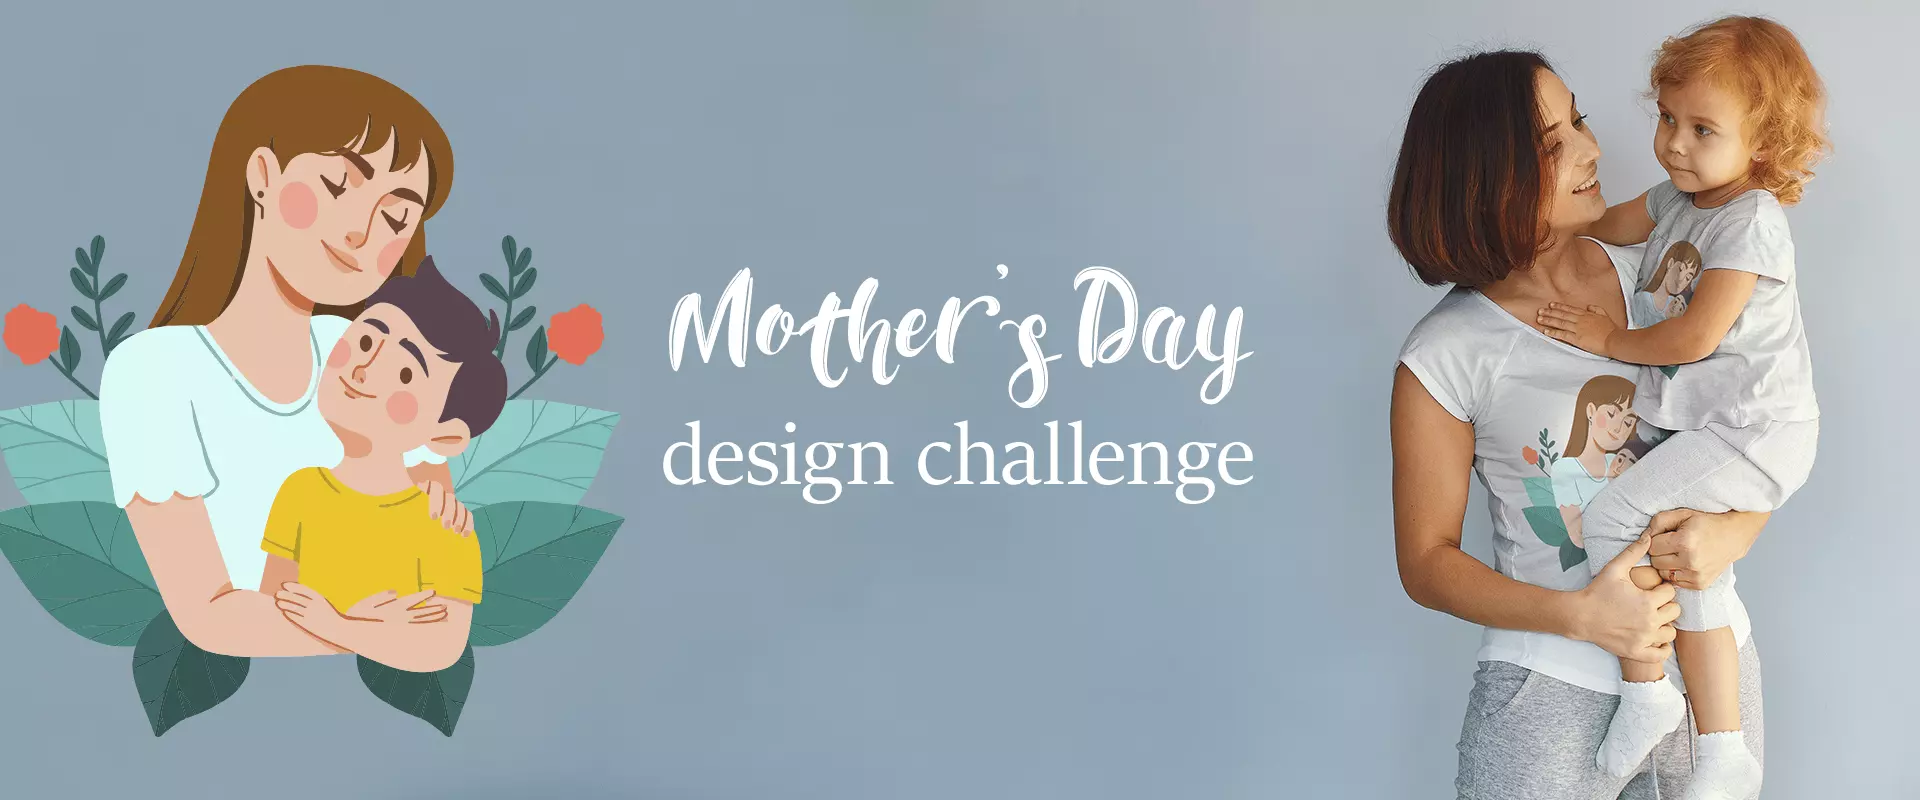 Mothers day design Challenge